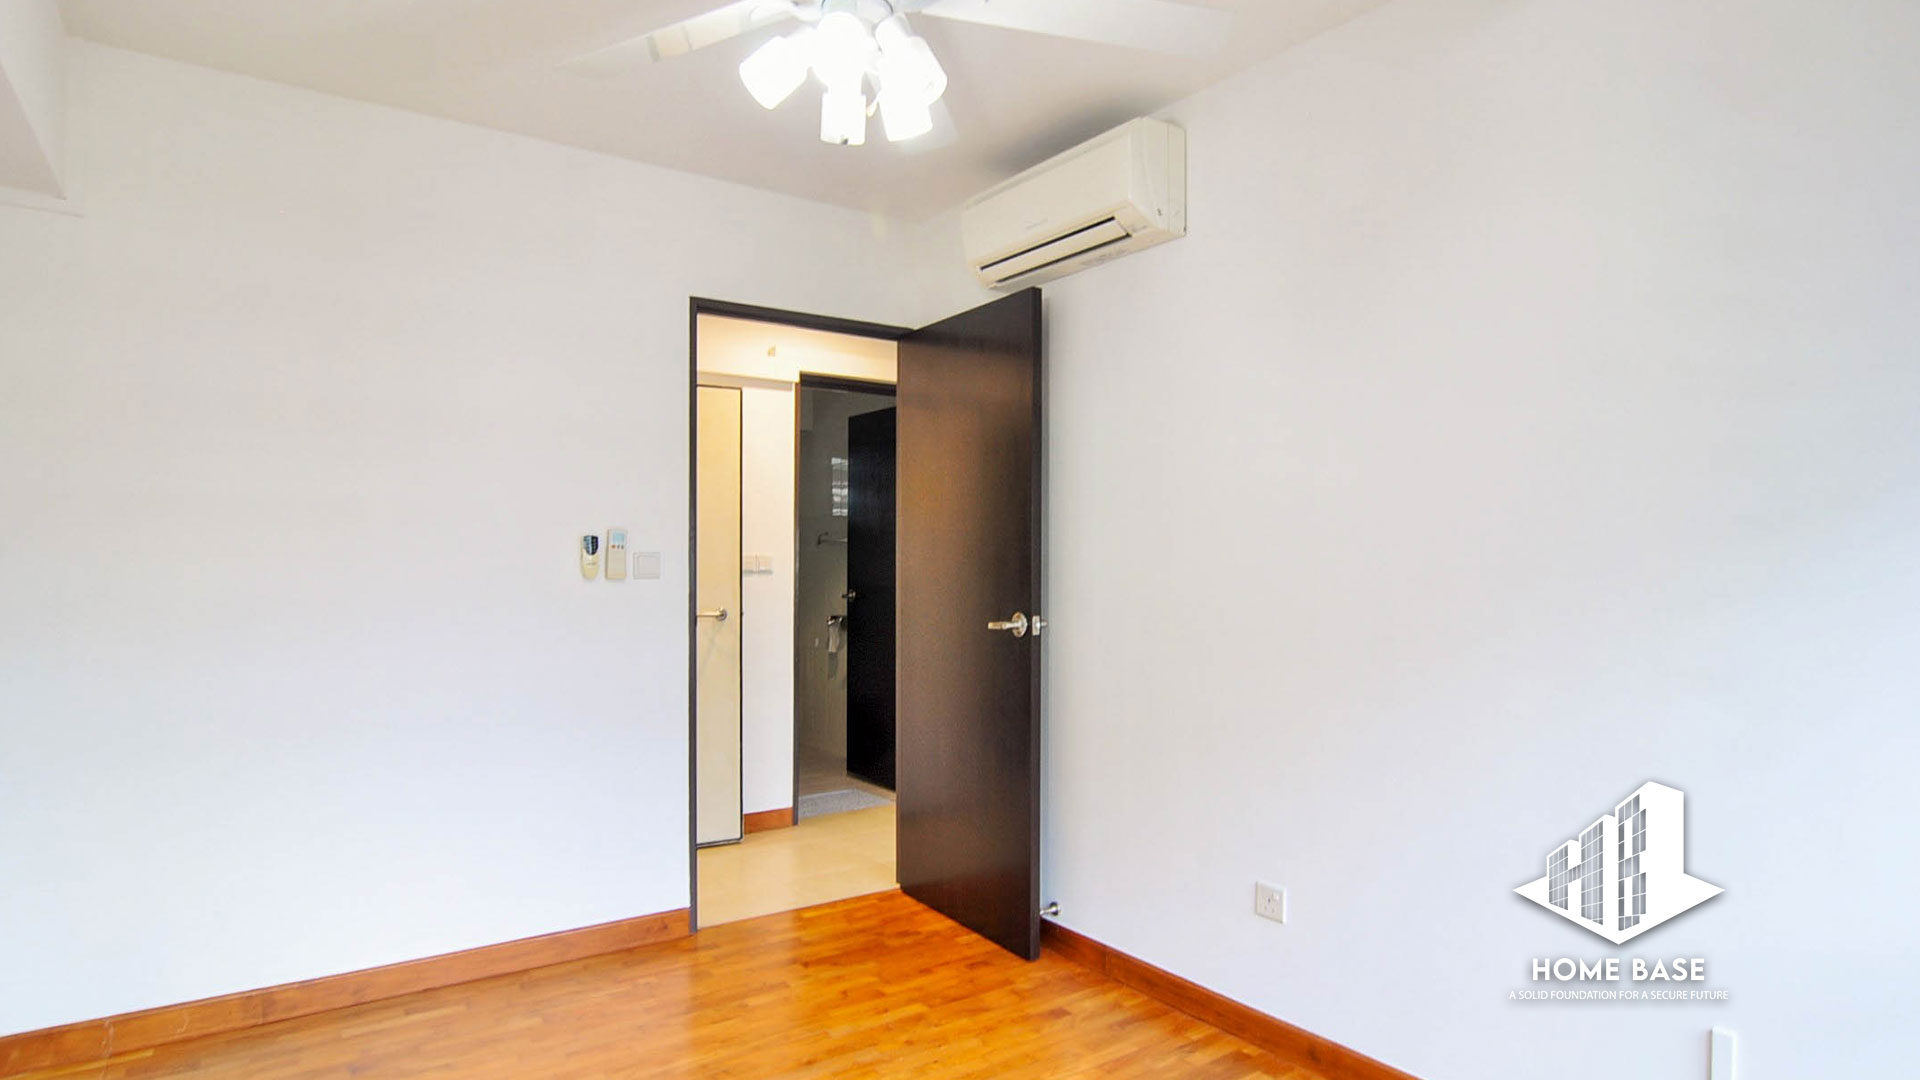 Bedroom of 302C Punggol Place Img 1